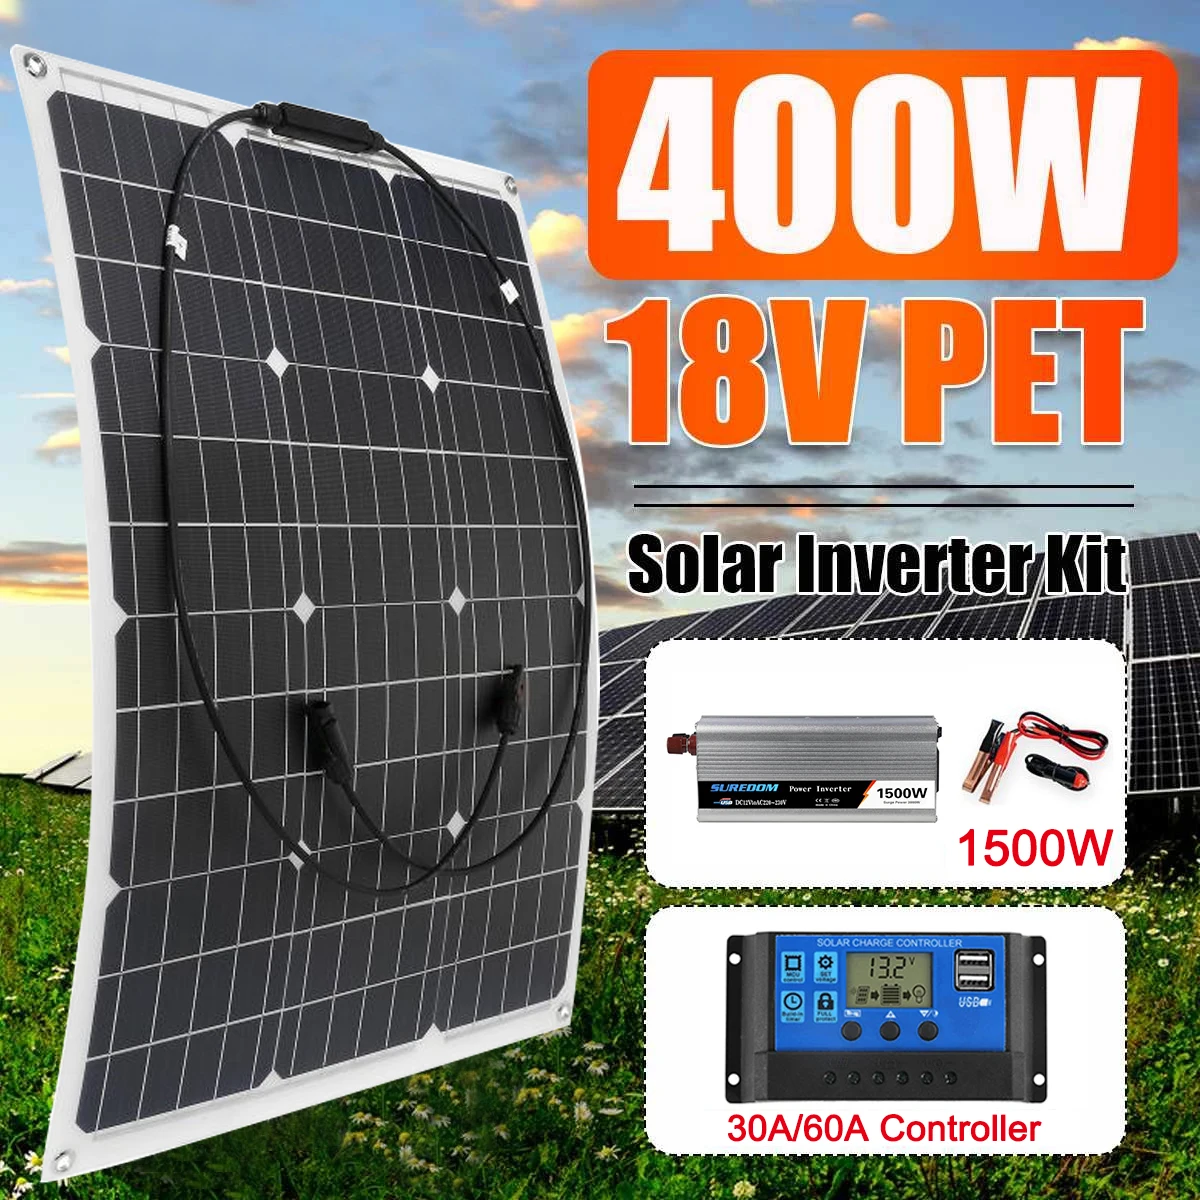 

220V Solar Power System 400W Solar Panel Battery Charger 220V/1500W Inverter Kit Complete Controller Home Grid Camp Phone PAD